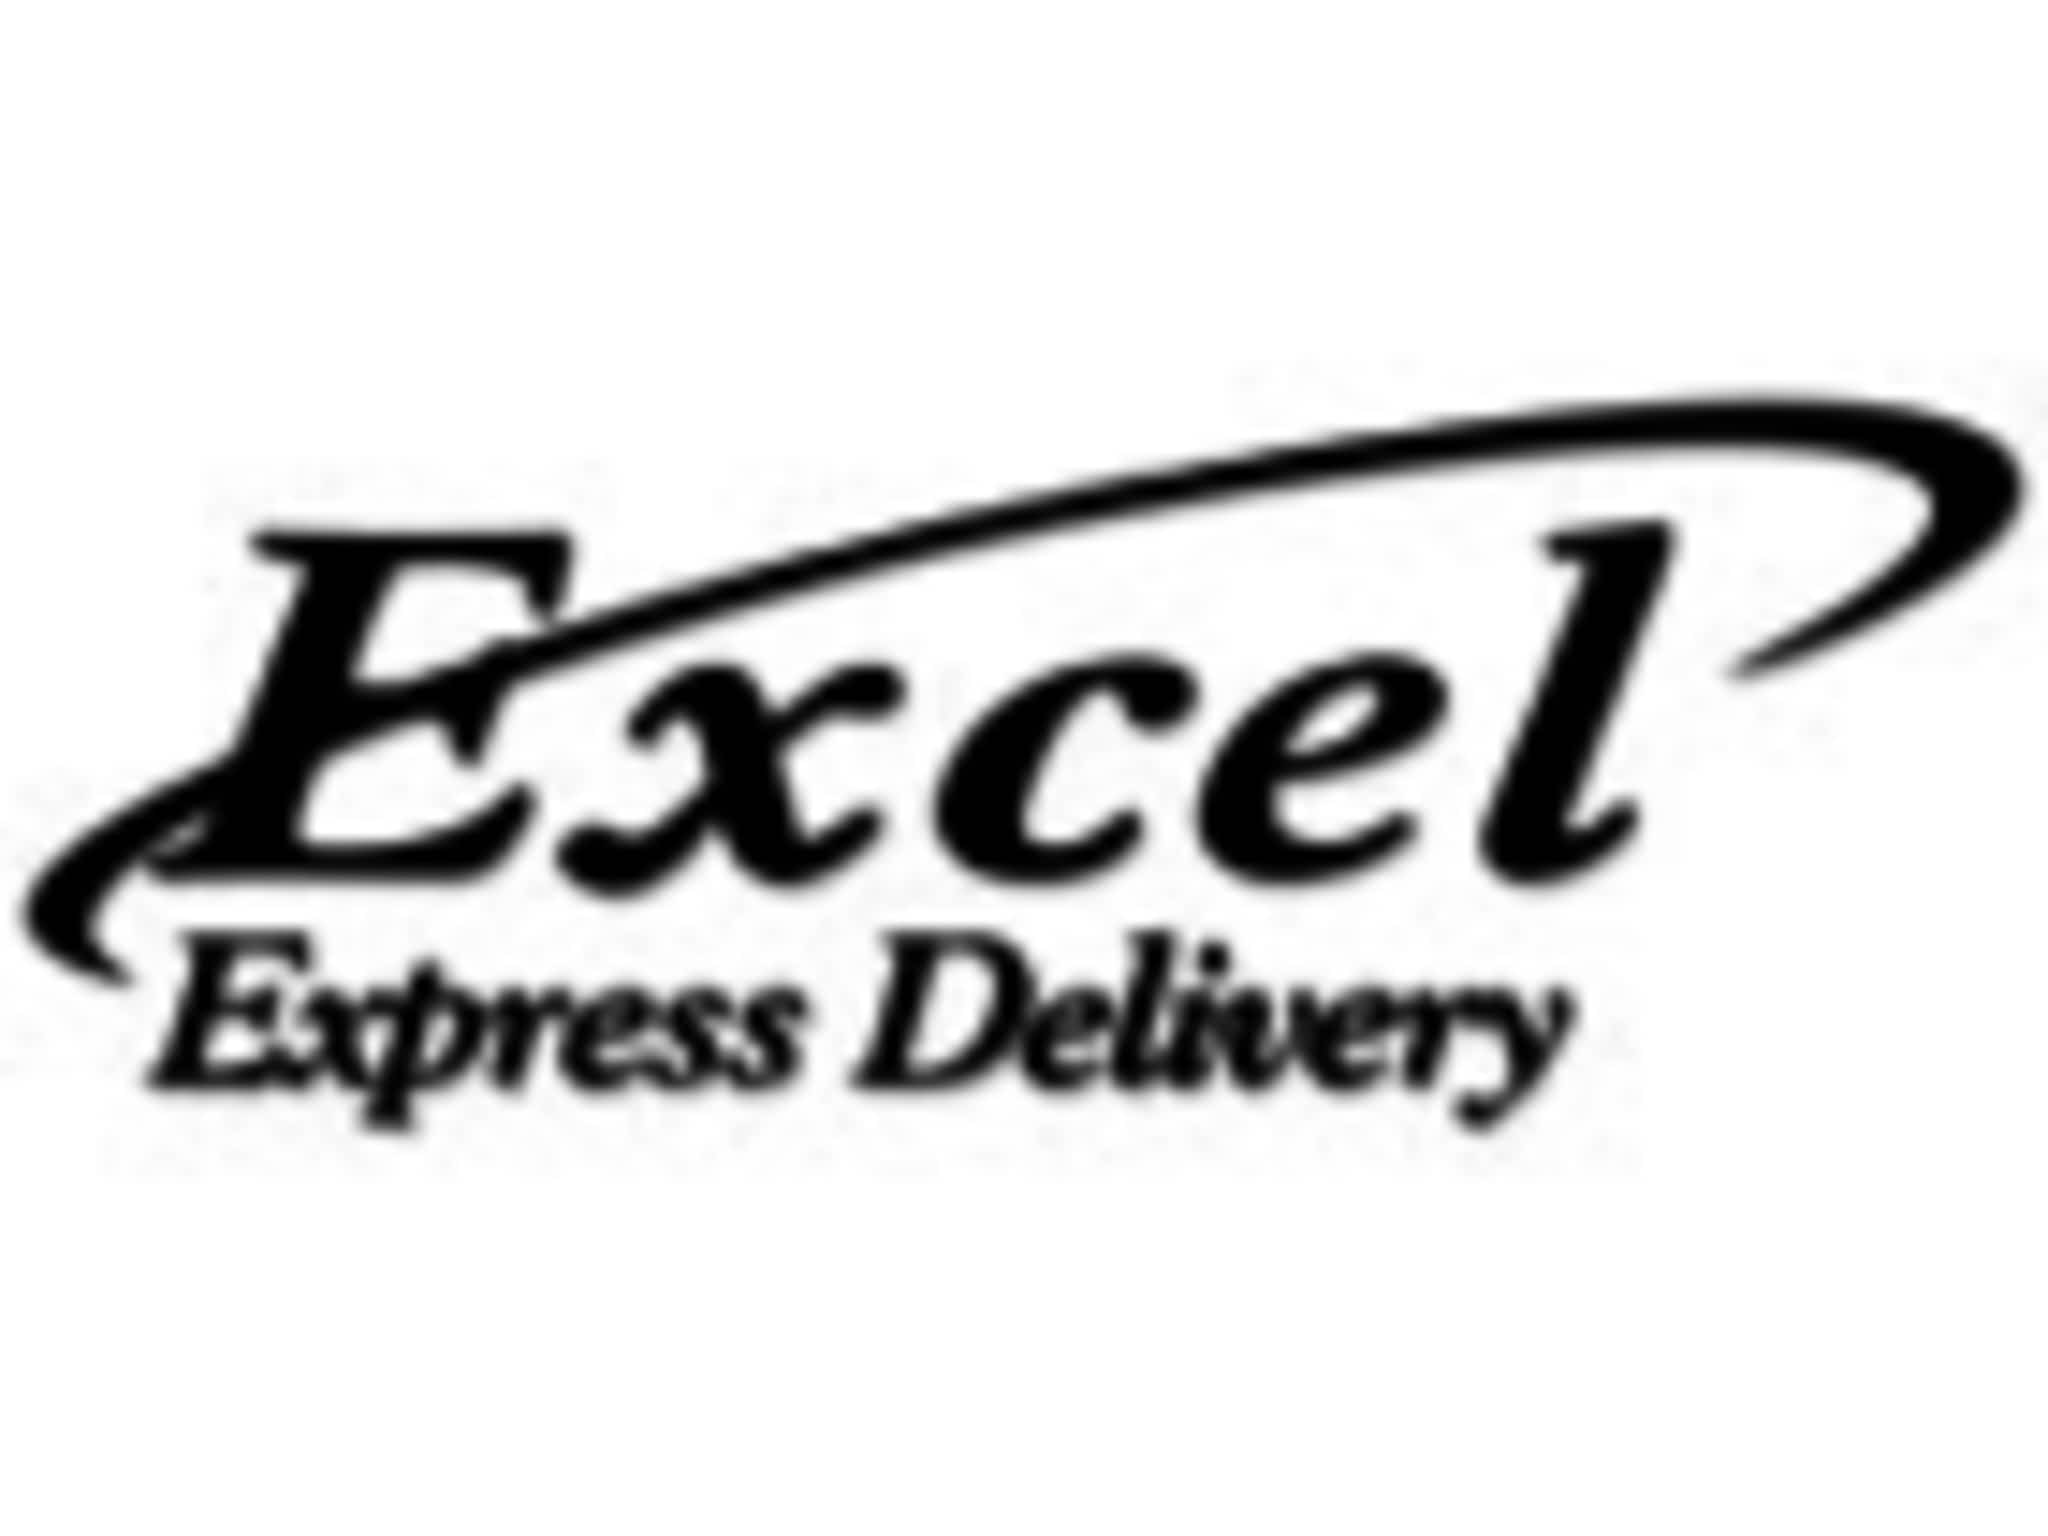 photo Excel Express Delivery